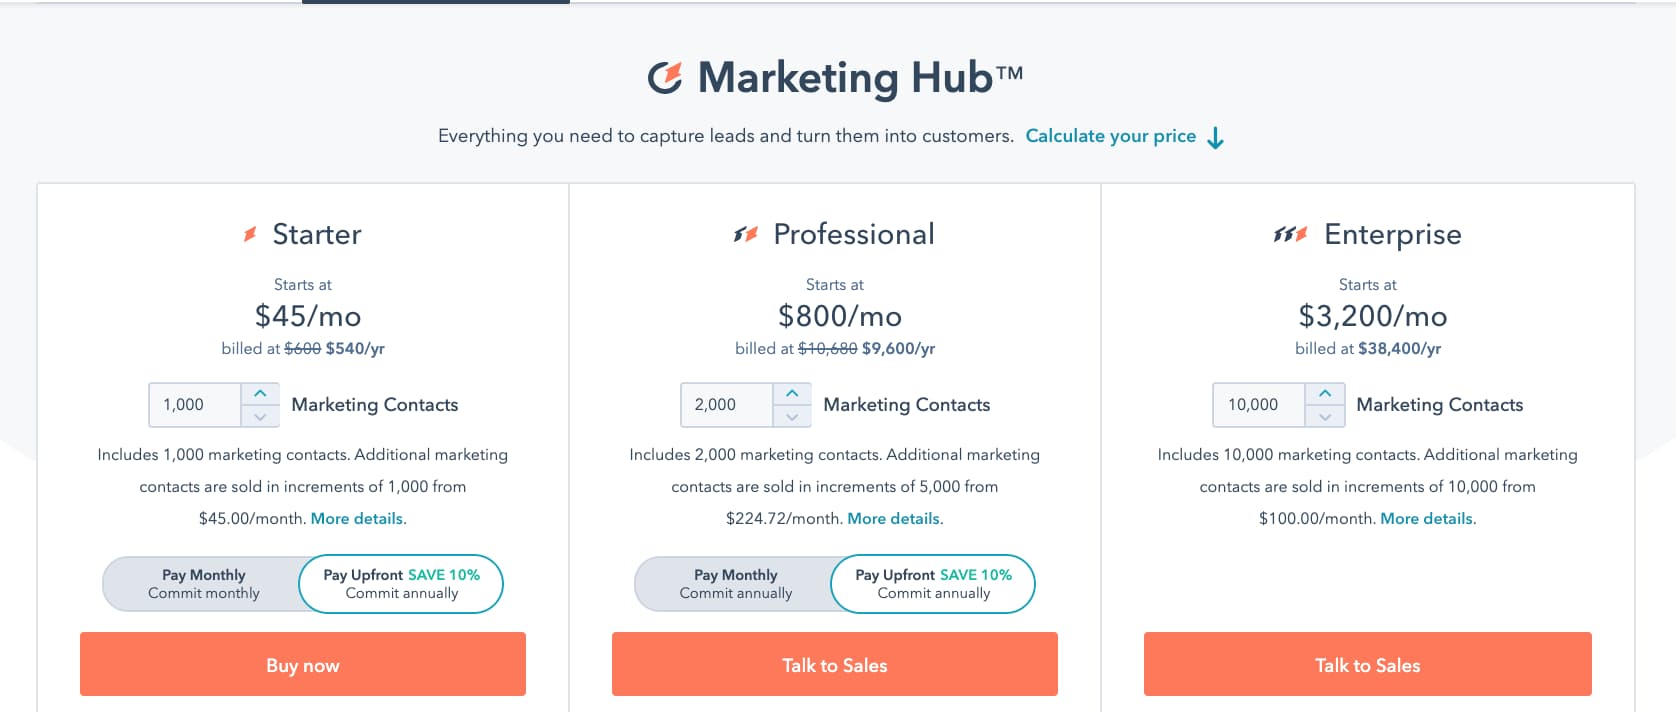 b2b pricing strategies: tiered pricing from hubspot